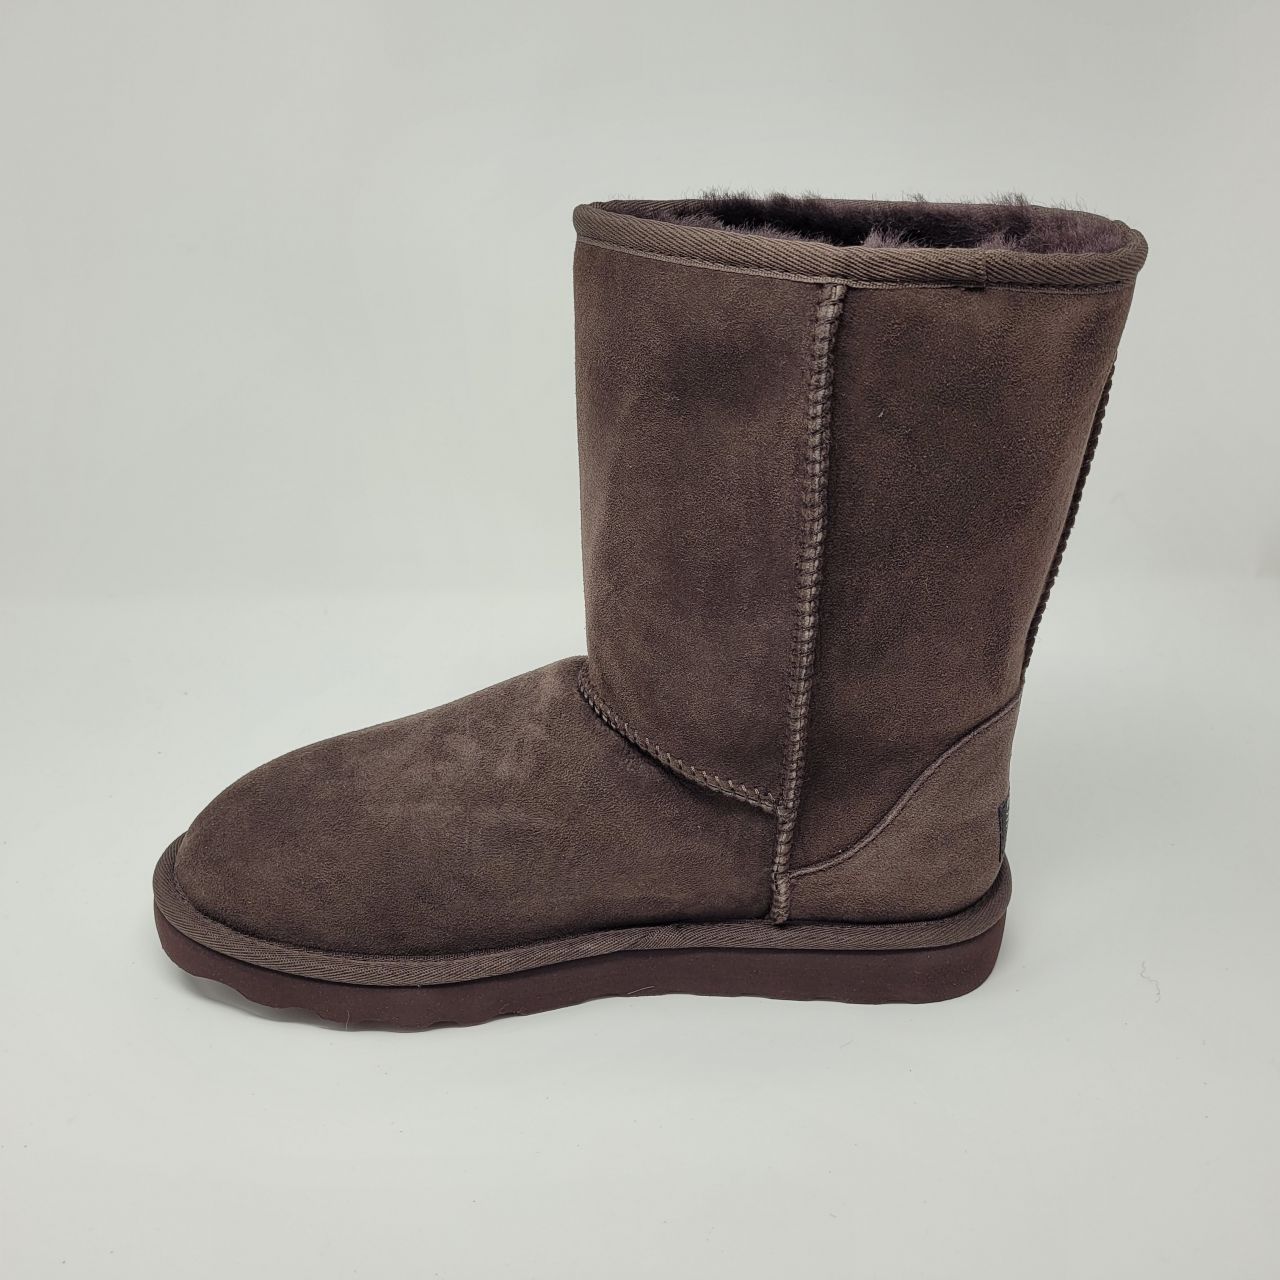 Chocolate Brown Sheepskin Boots to Buy Online UK from Jacobs & Dalton